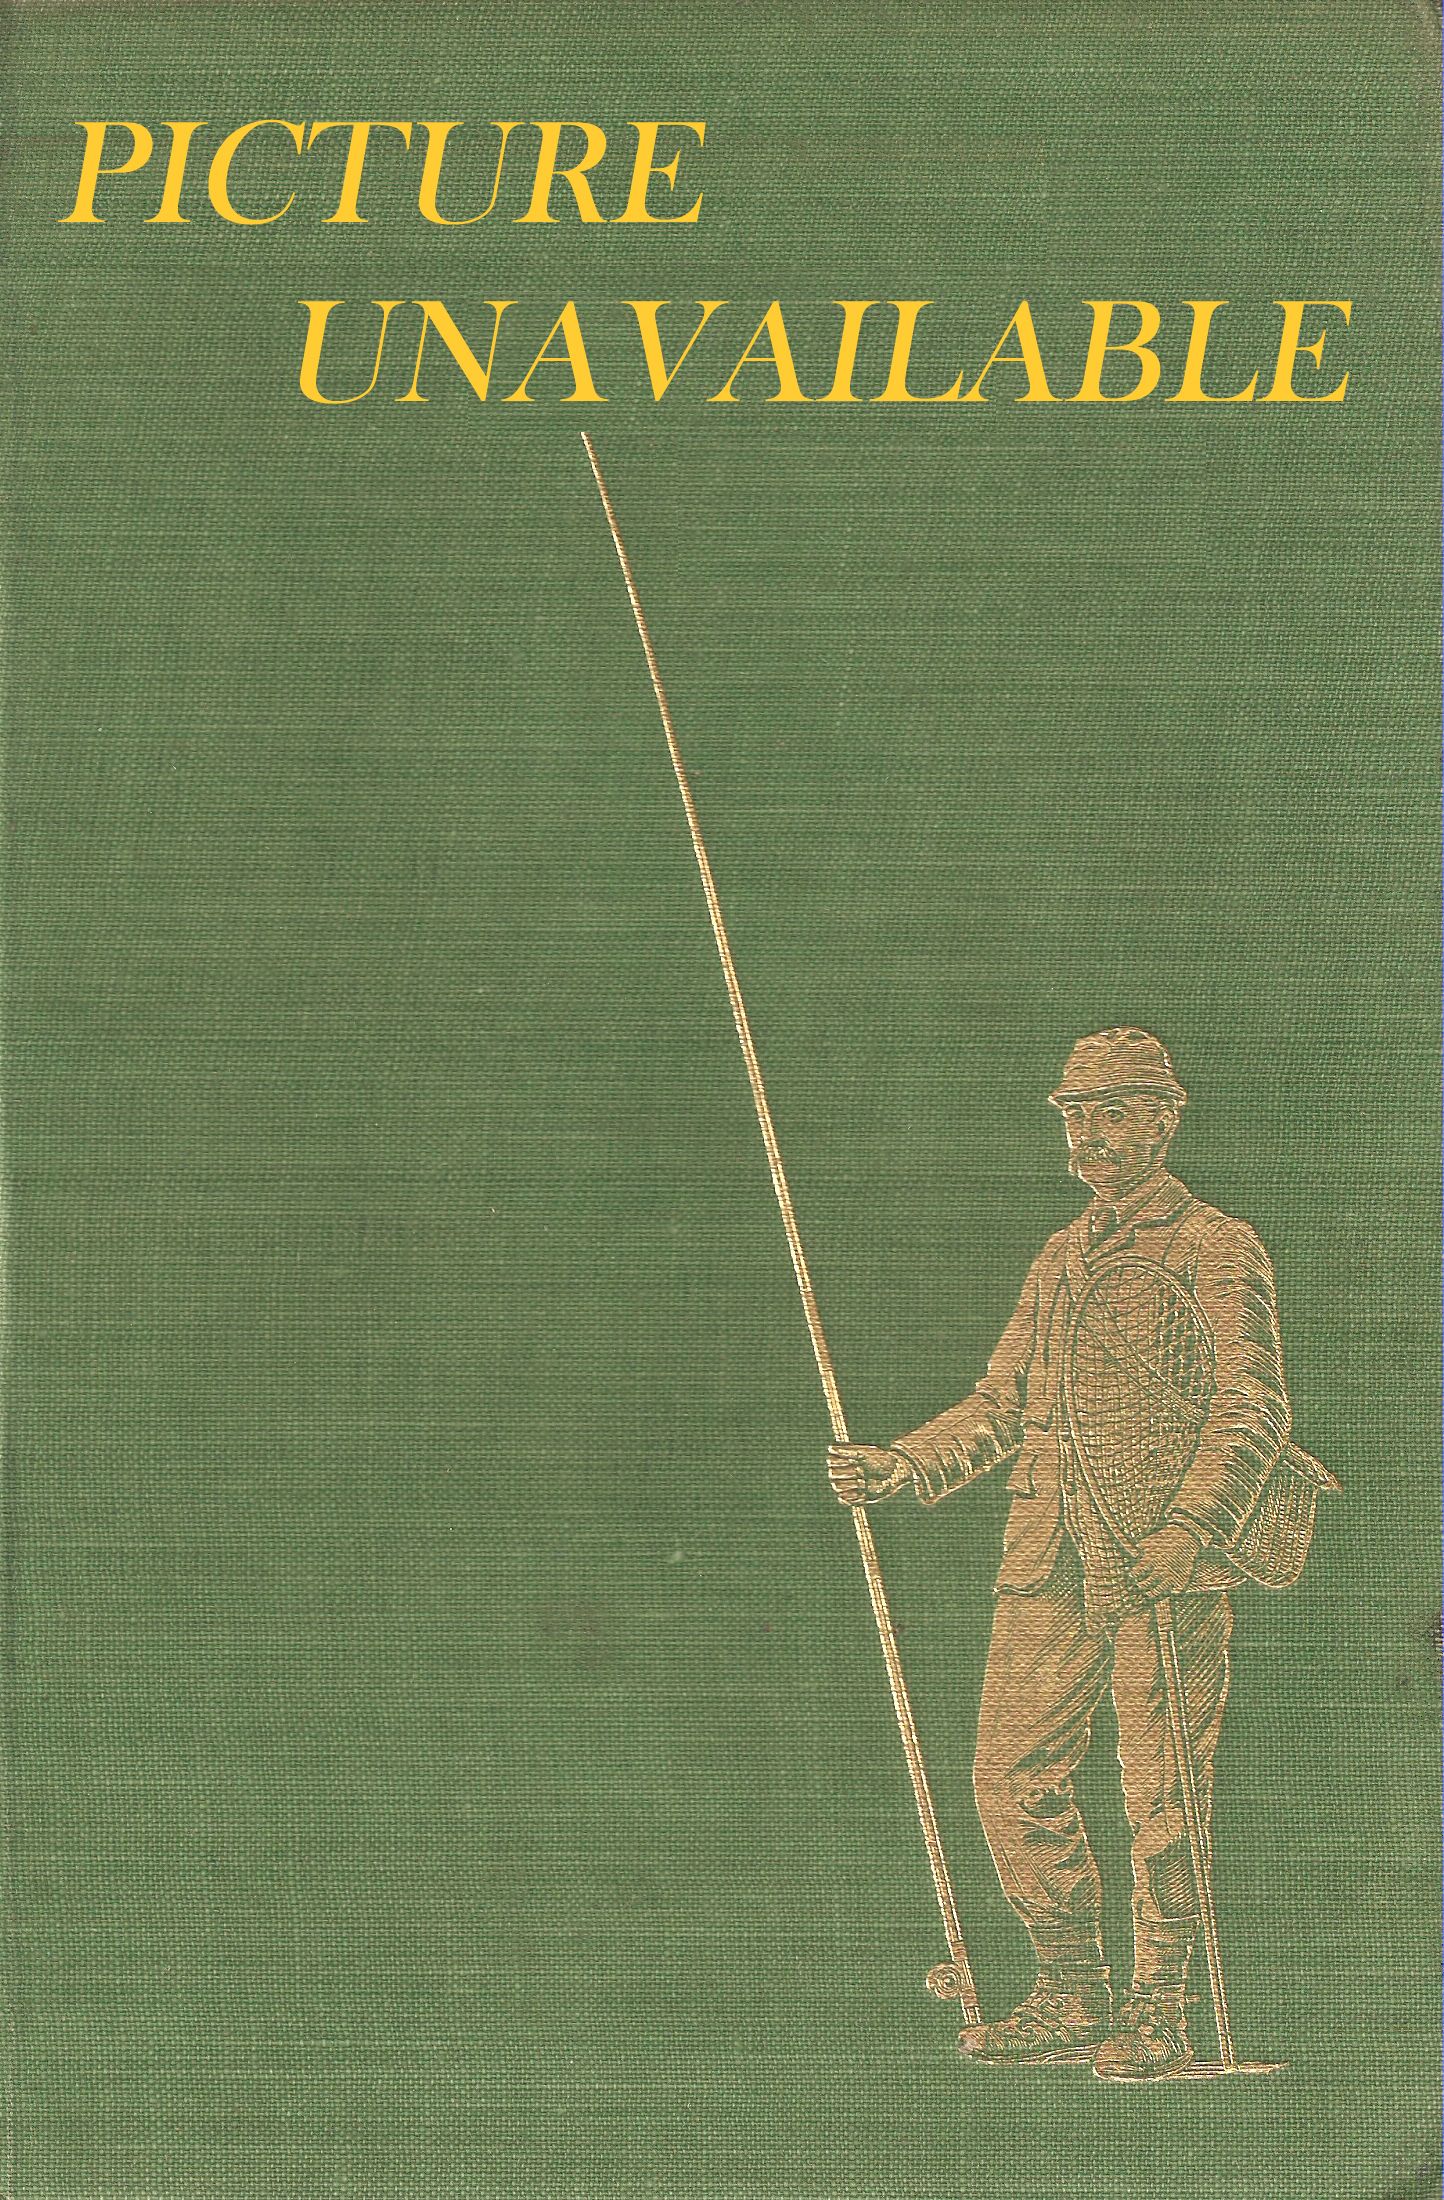 THE ENCYCLOPAEDIA OF POLE FISHING. By Kevin Ashurst and Colin Graham.